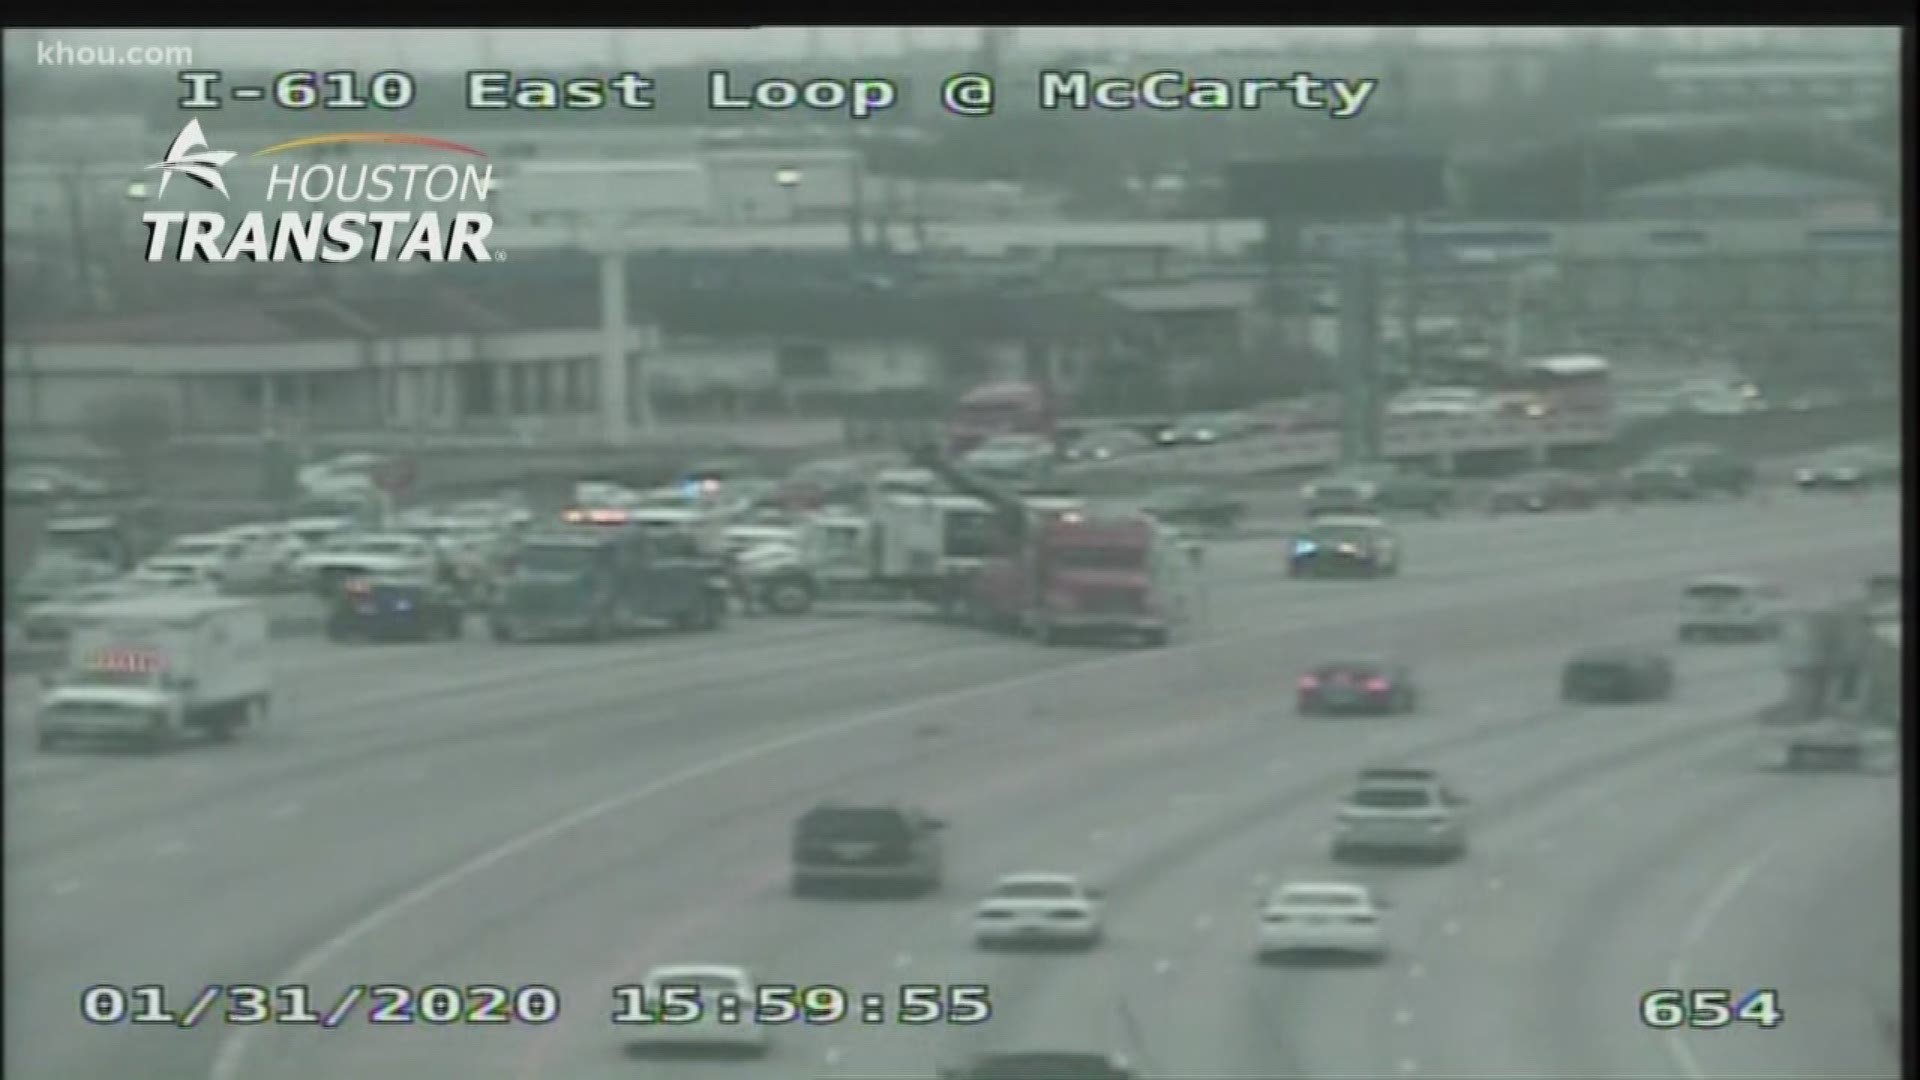 All westbound lanes of the North Loop at McCarty are shut down for a wreck involving a rolled over big rig.